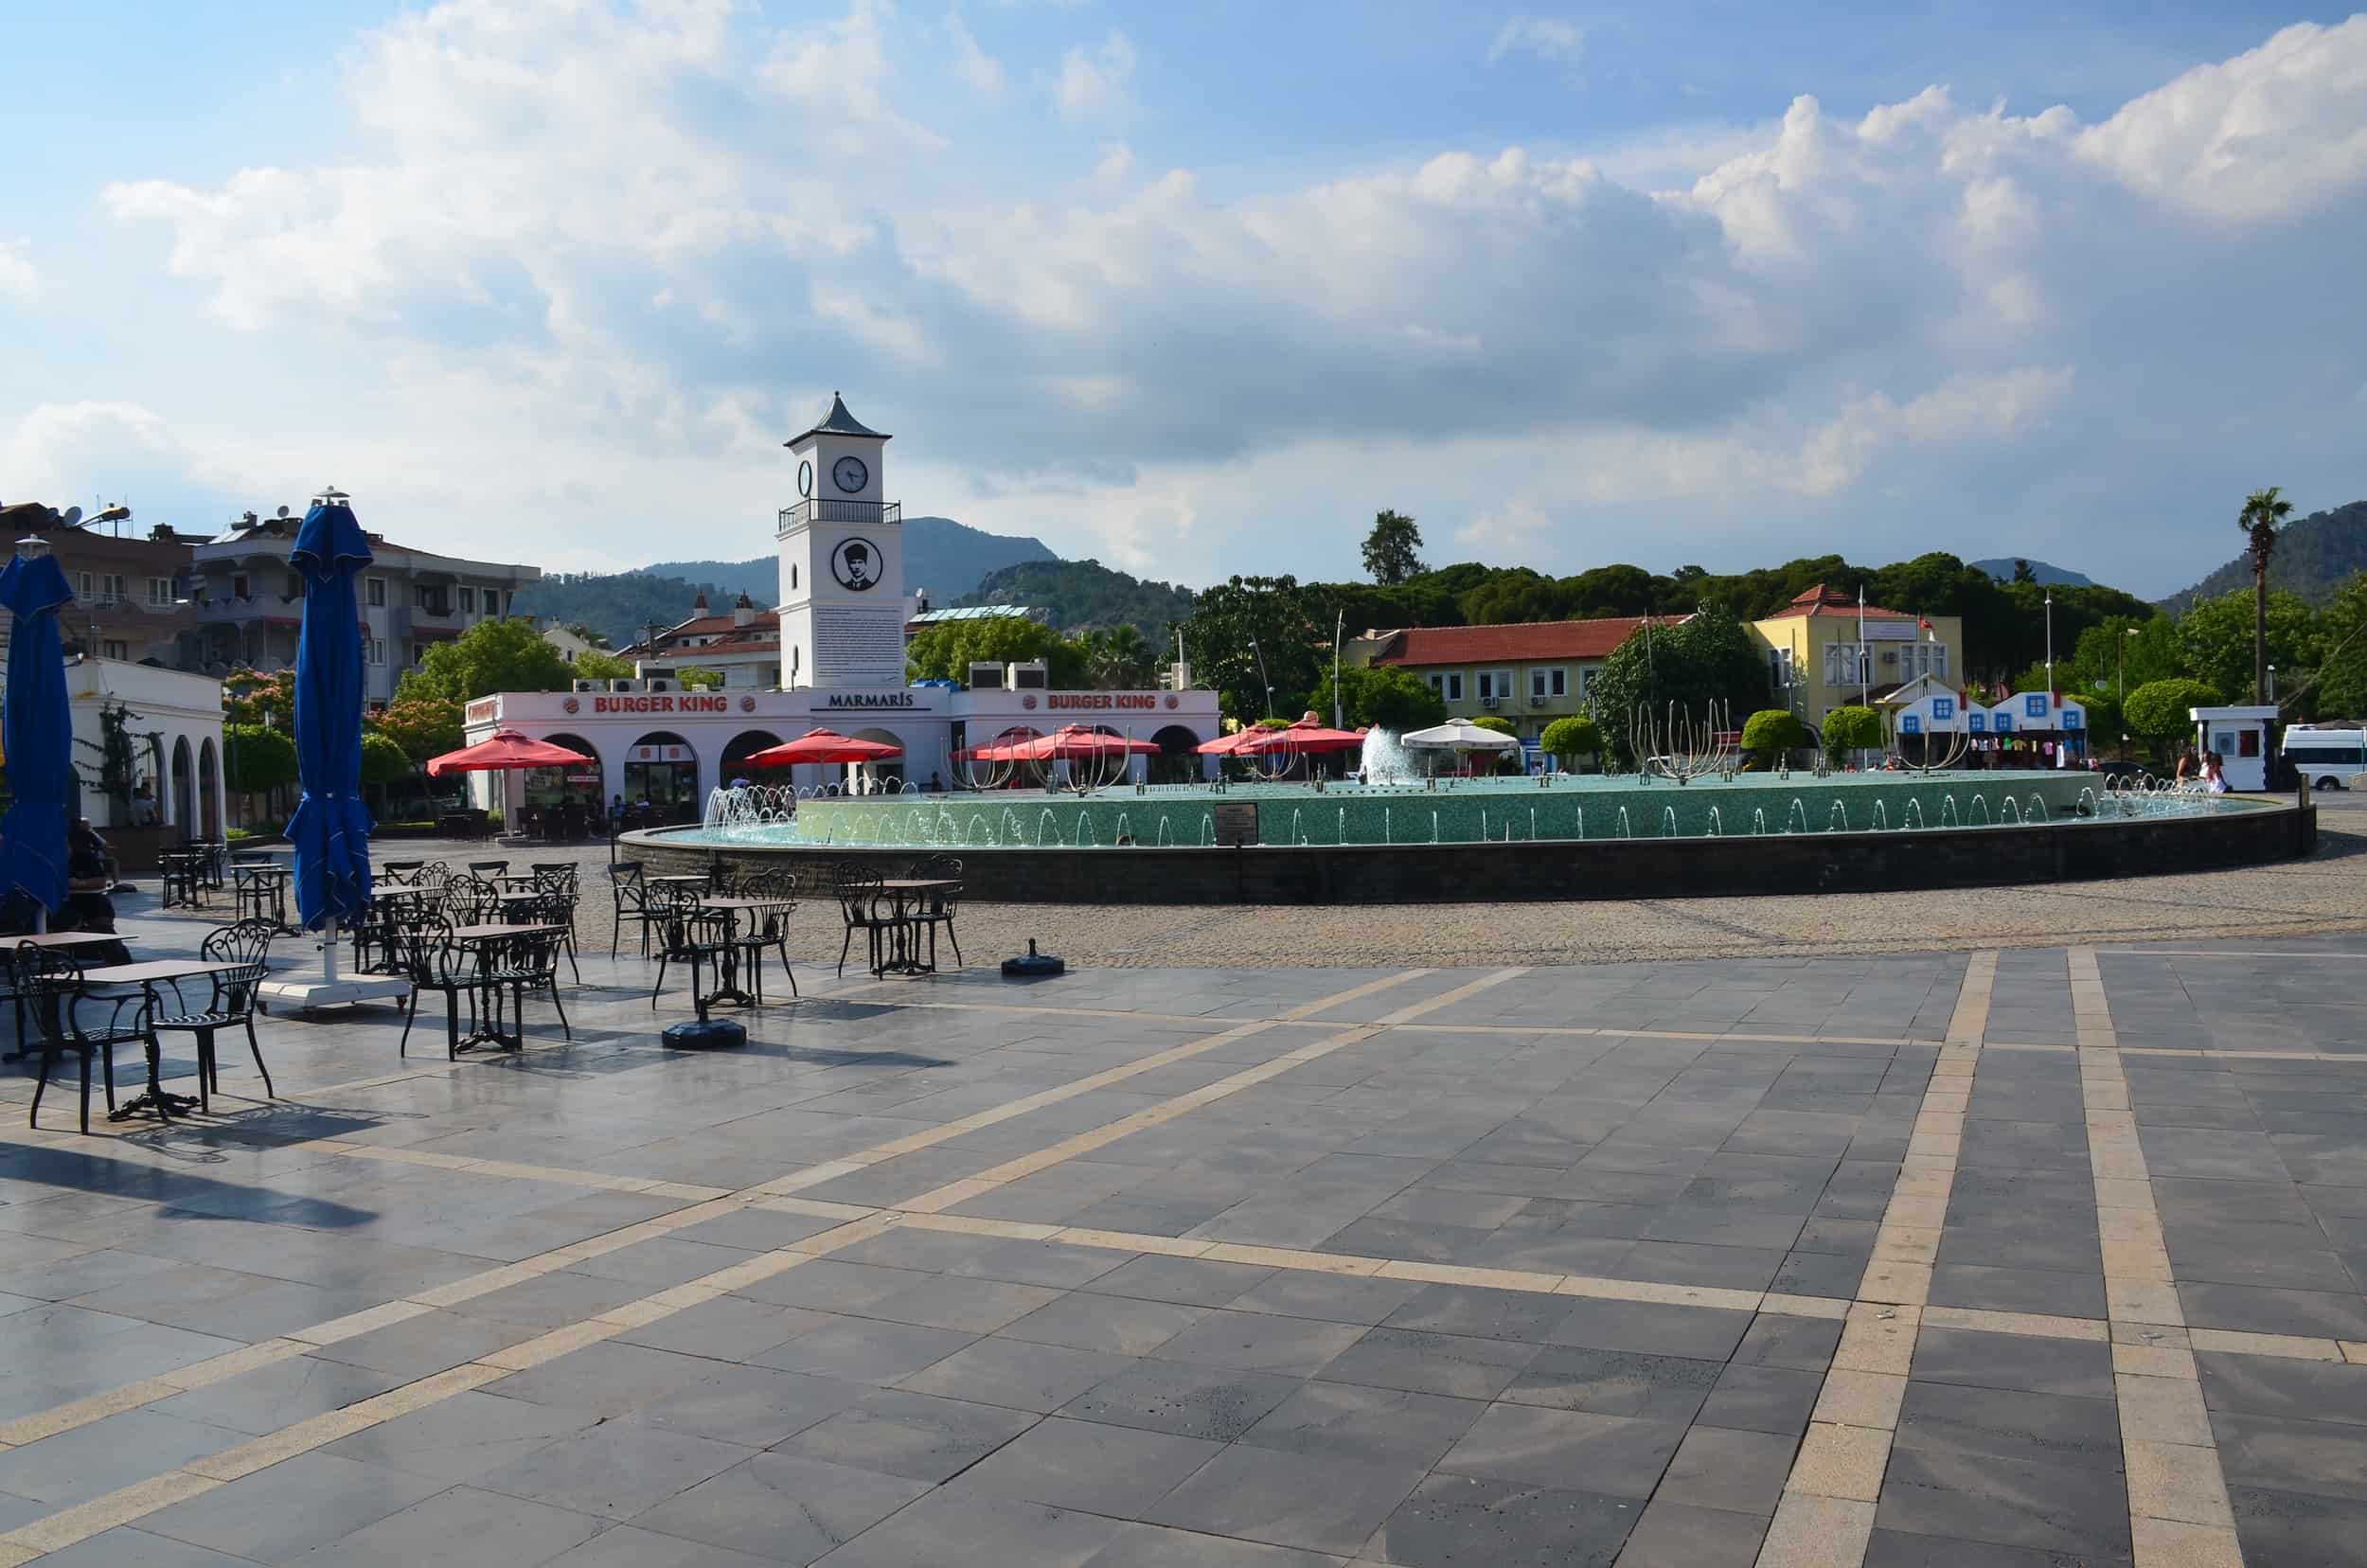 May 19 Youth Square in Marmaris, Turkey